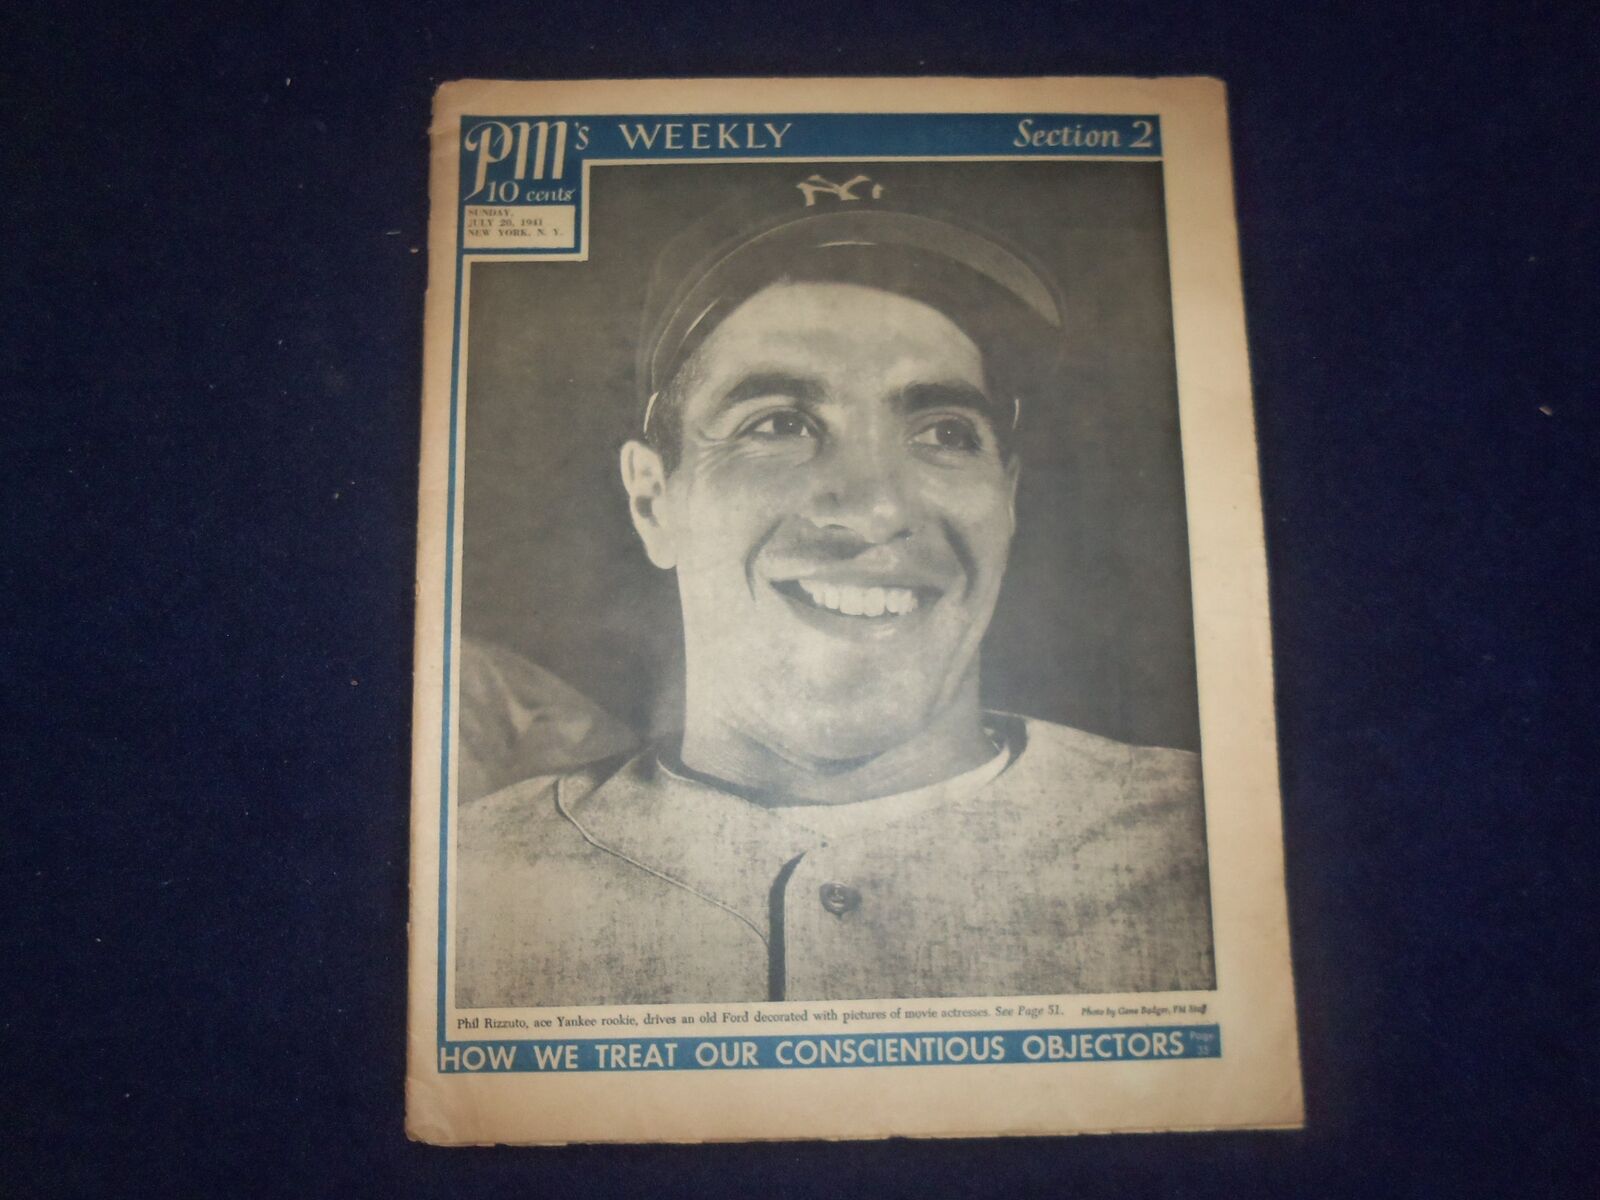 1941 JULY 20 PM'S WEEKLY NEWSPAPER - PHIL RIZZUTO, ACE YANKEE ROOKIE - NP 7285